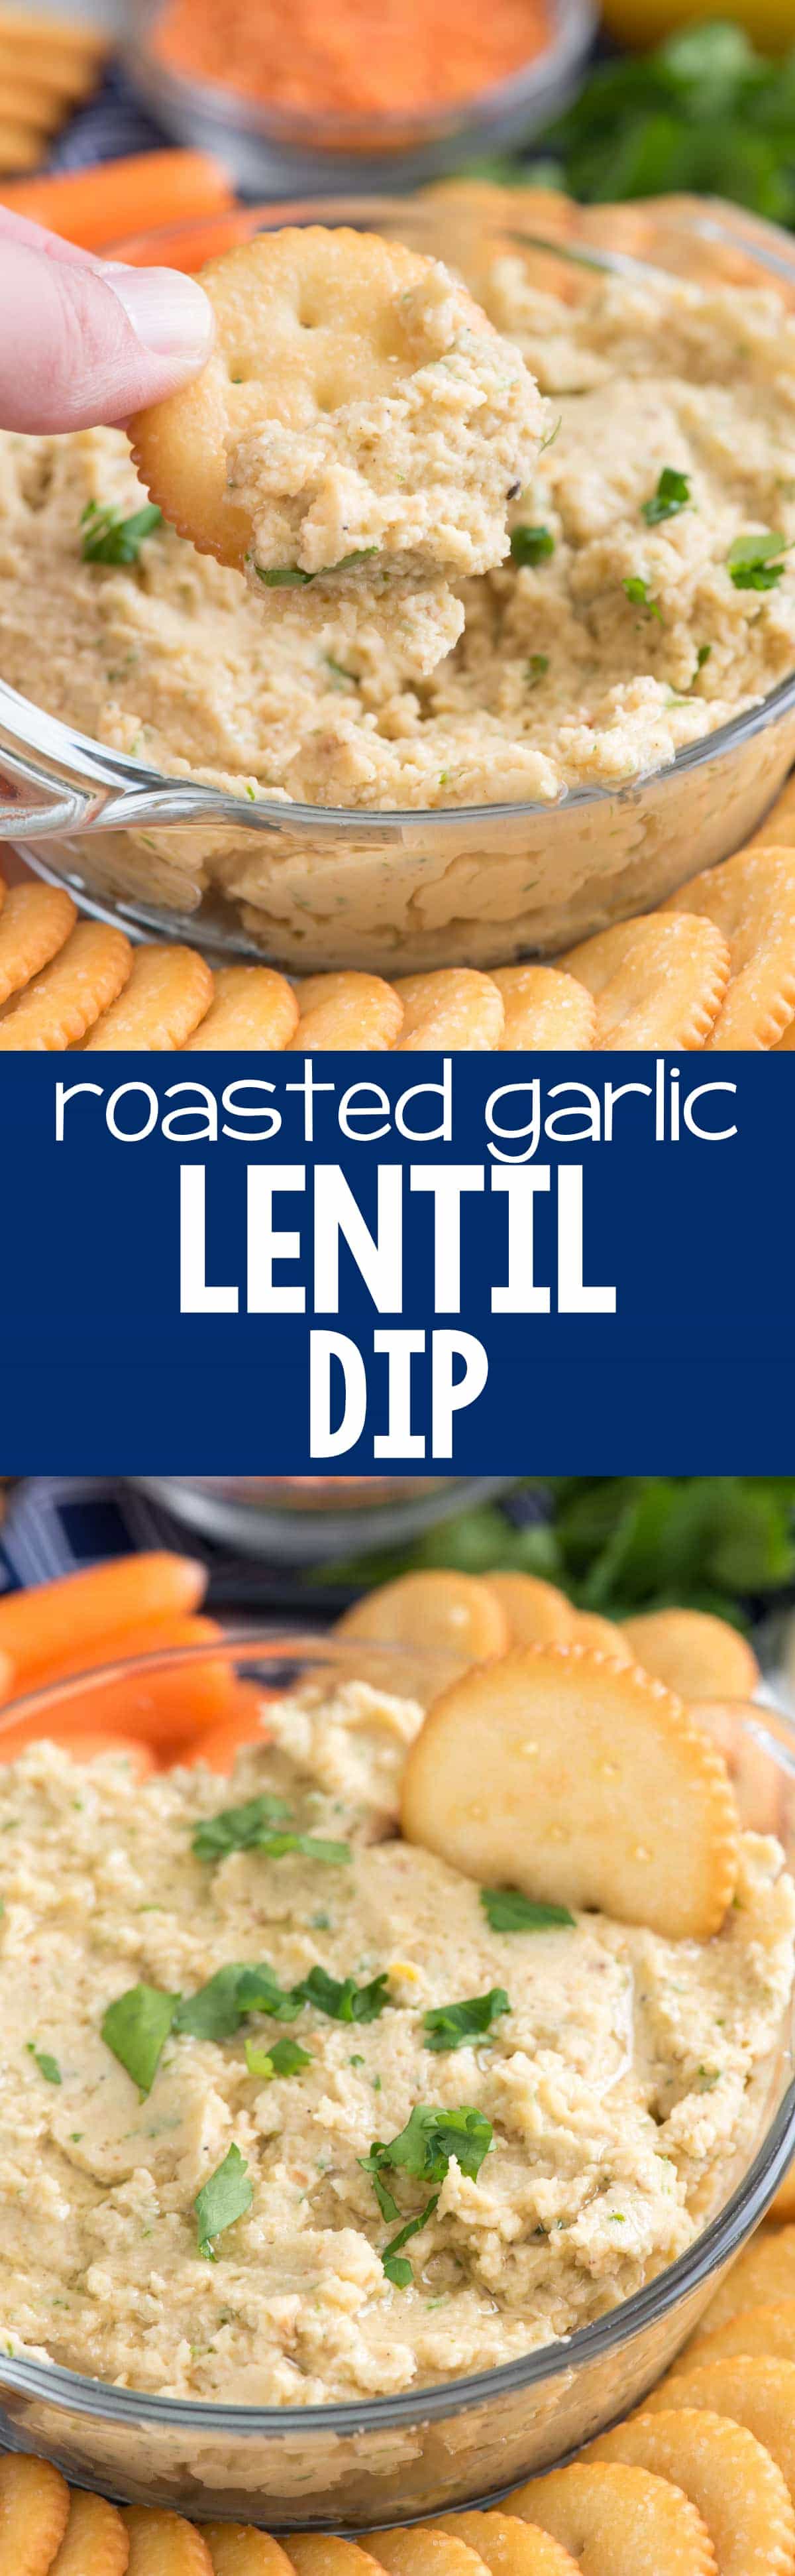 Roasted Garlic Lentil Dip - if you love white bean dip this LENTIL dip is for you! It's FULL of roasted garlic and protein and is the best snack or meal!